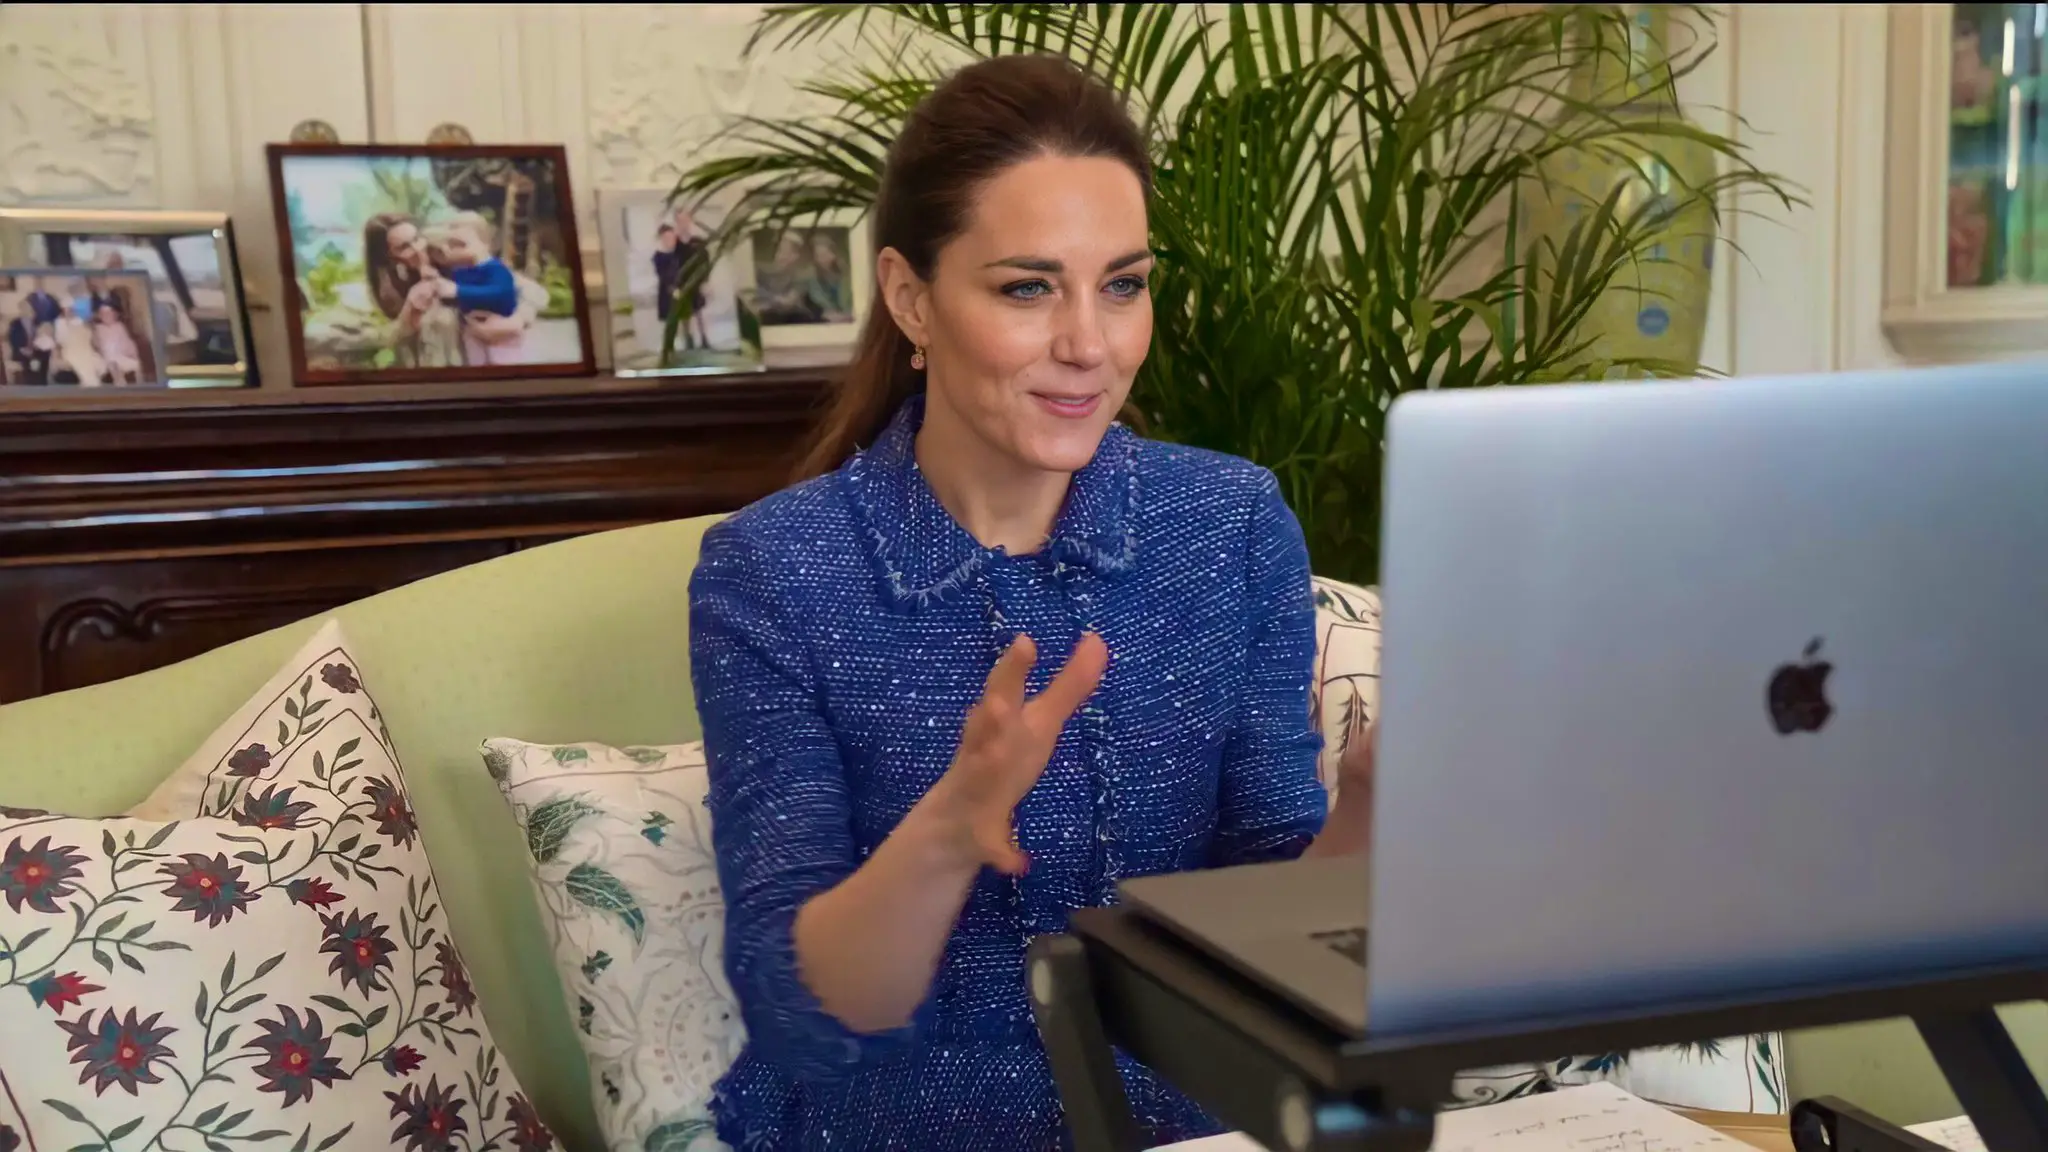 The Duchess of Cambridge, Patron of Place2Be, made a series of video calls and spoke one-on-one with teachers from Ribbon Academy in County Durham